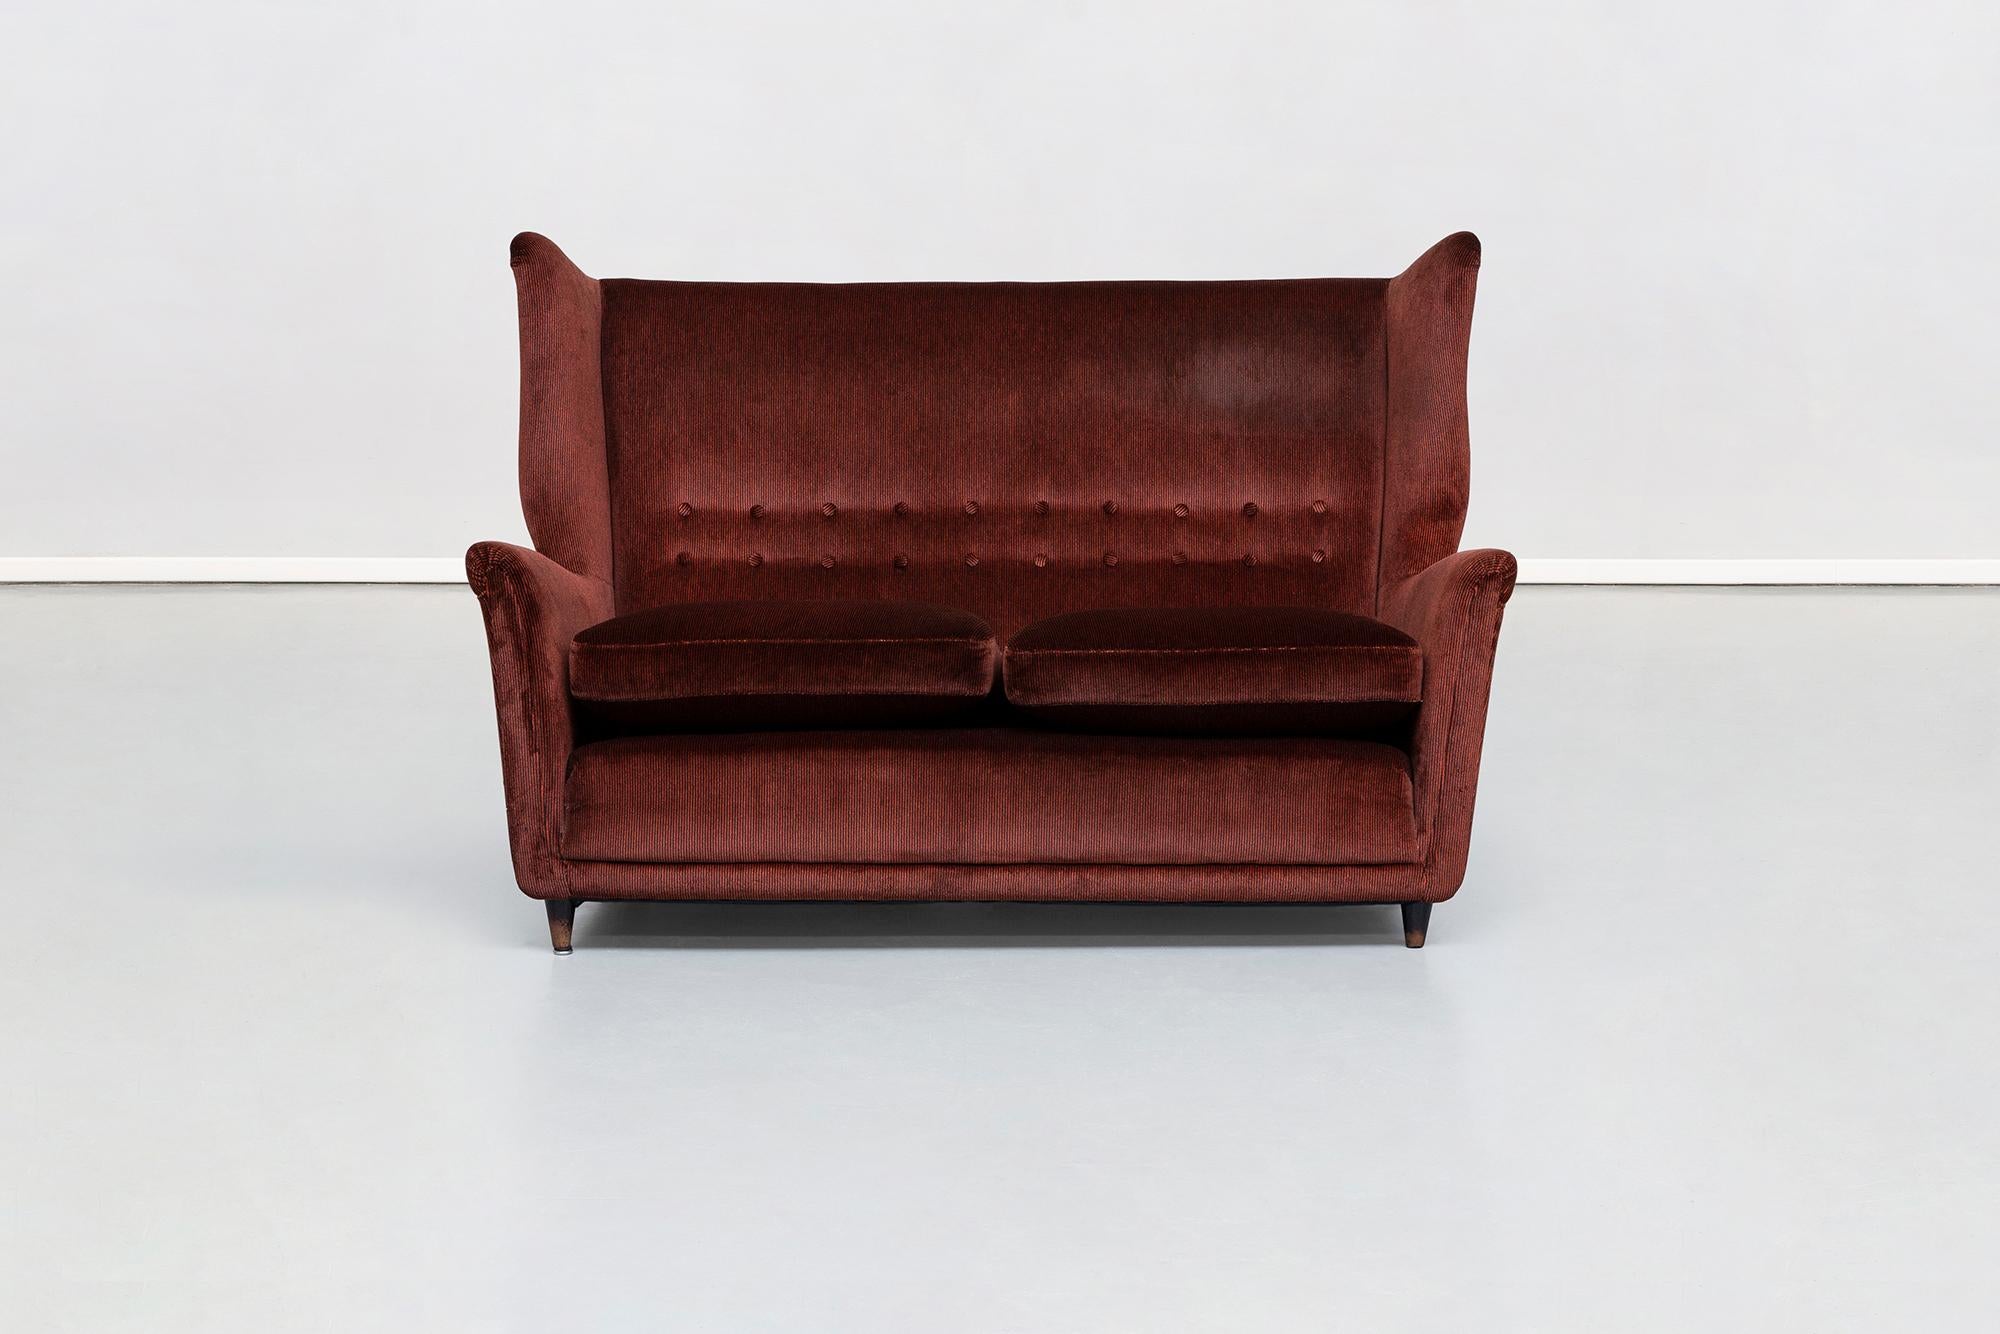 Italian two-seat sofa in red corduroy velvet by Grand Hotel Duomo Milano, 1950s
Extremely rare red corduroy sofa from fifties, coming from Grand Hotel del Duomo in Milan, design by Gio Ponti and Melchiorre Bega, like all the other hotel